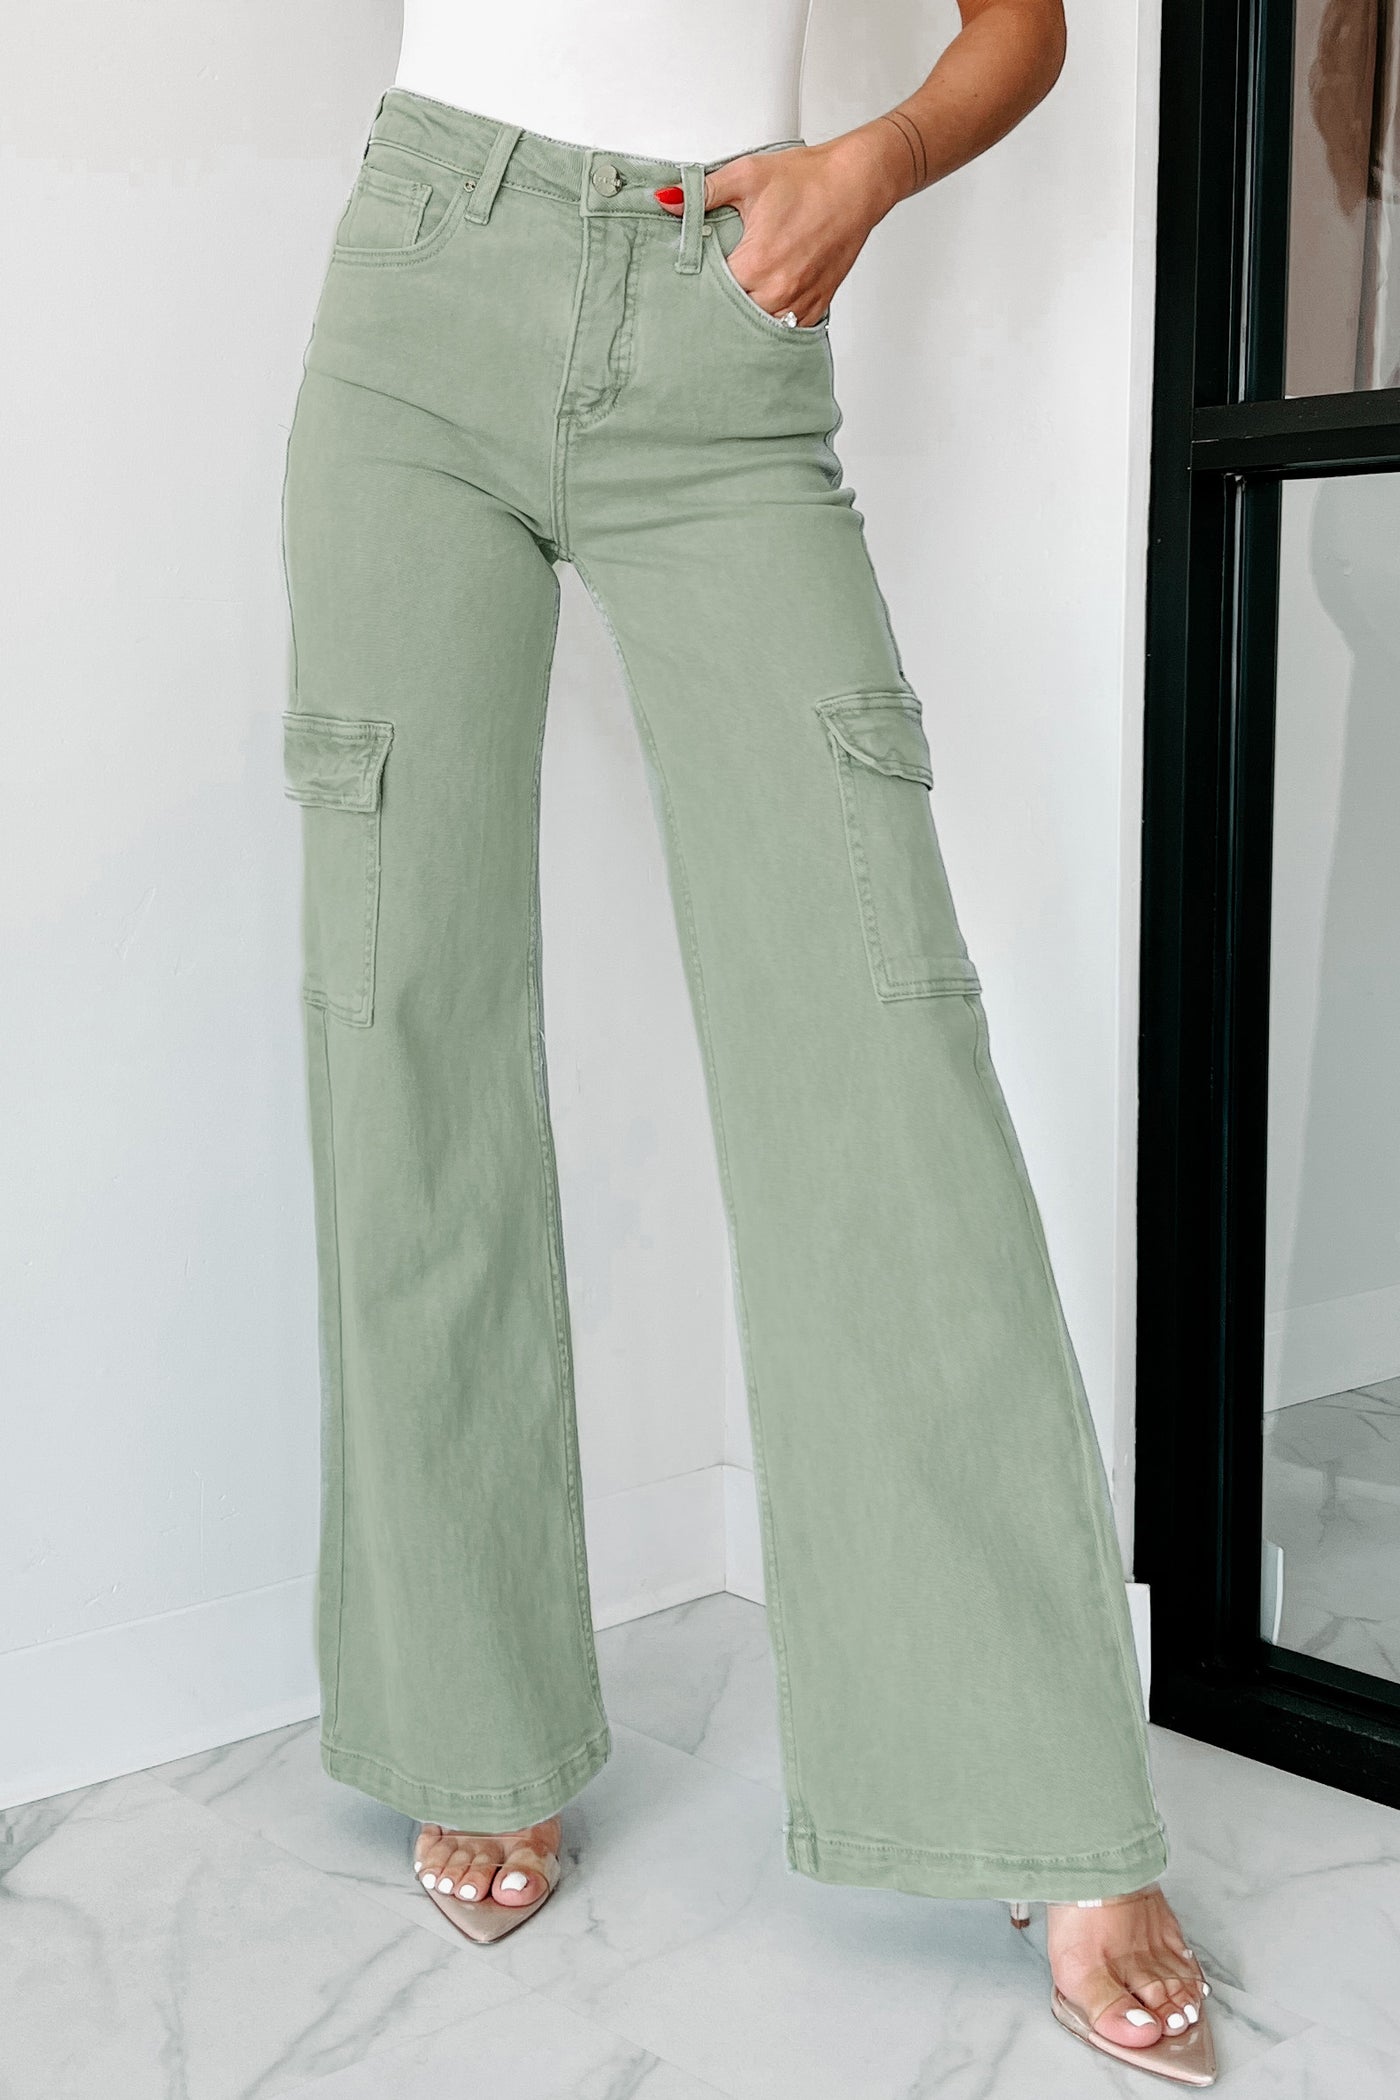 Risen FP Exclusive High Rise Olive Tummy Control Wide Leg Jeans